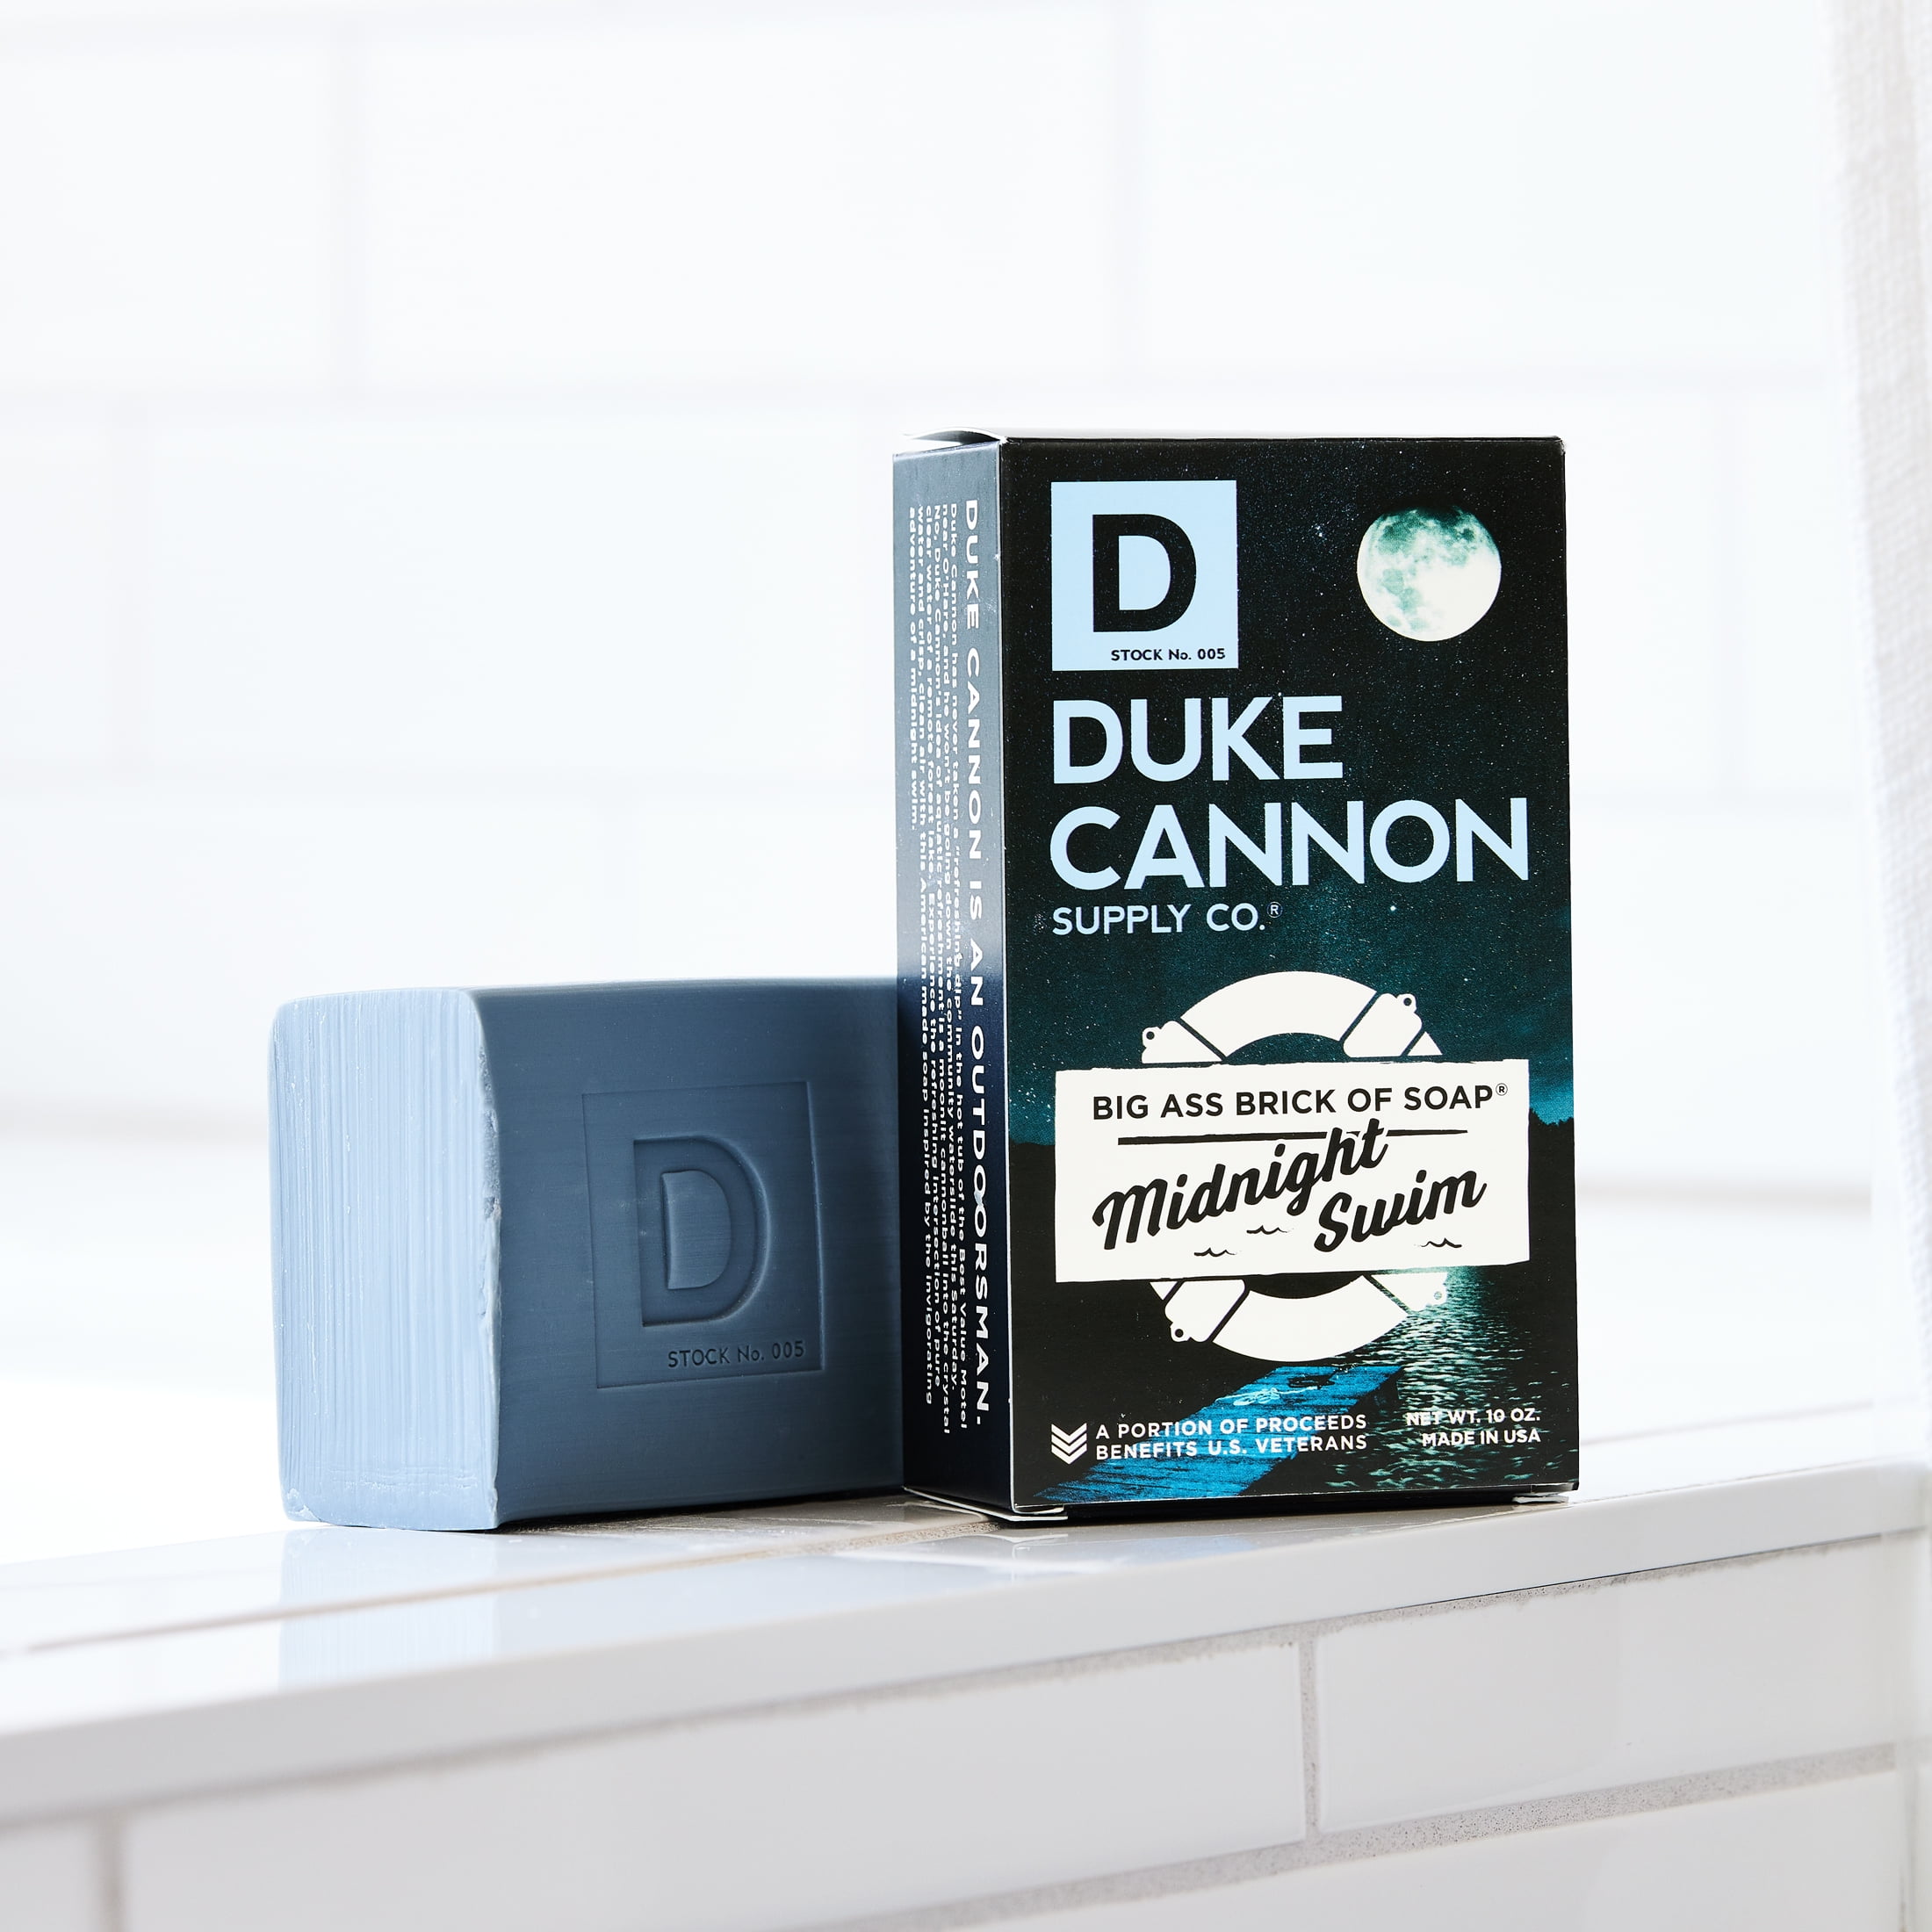 Duke Cannon's Big Ass Brick of Soap - 9 Manly Scents! – Mermaid Cove